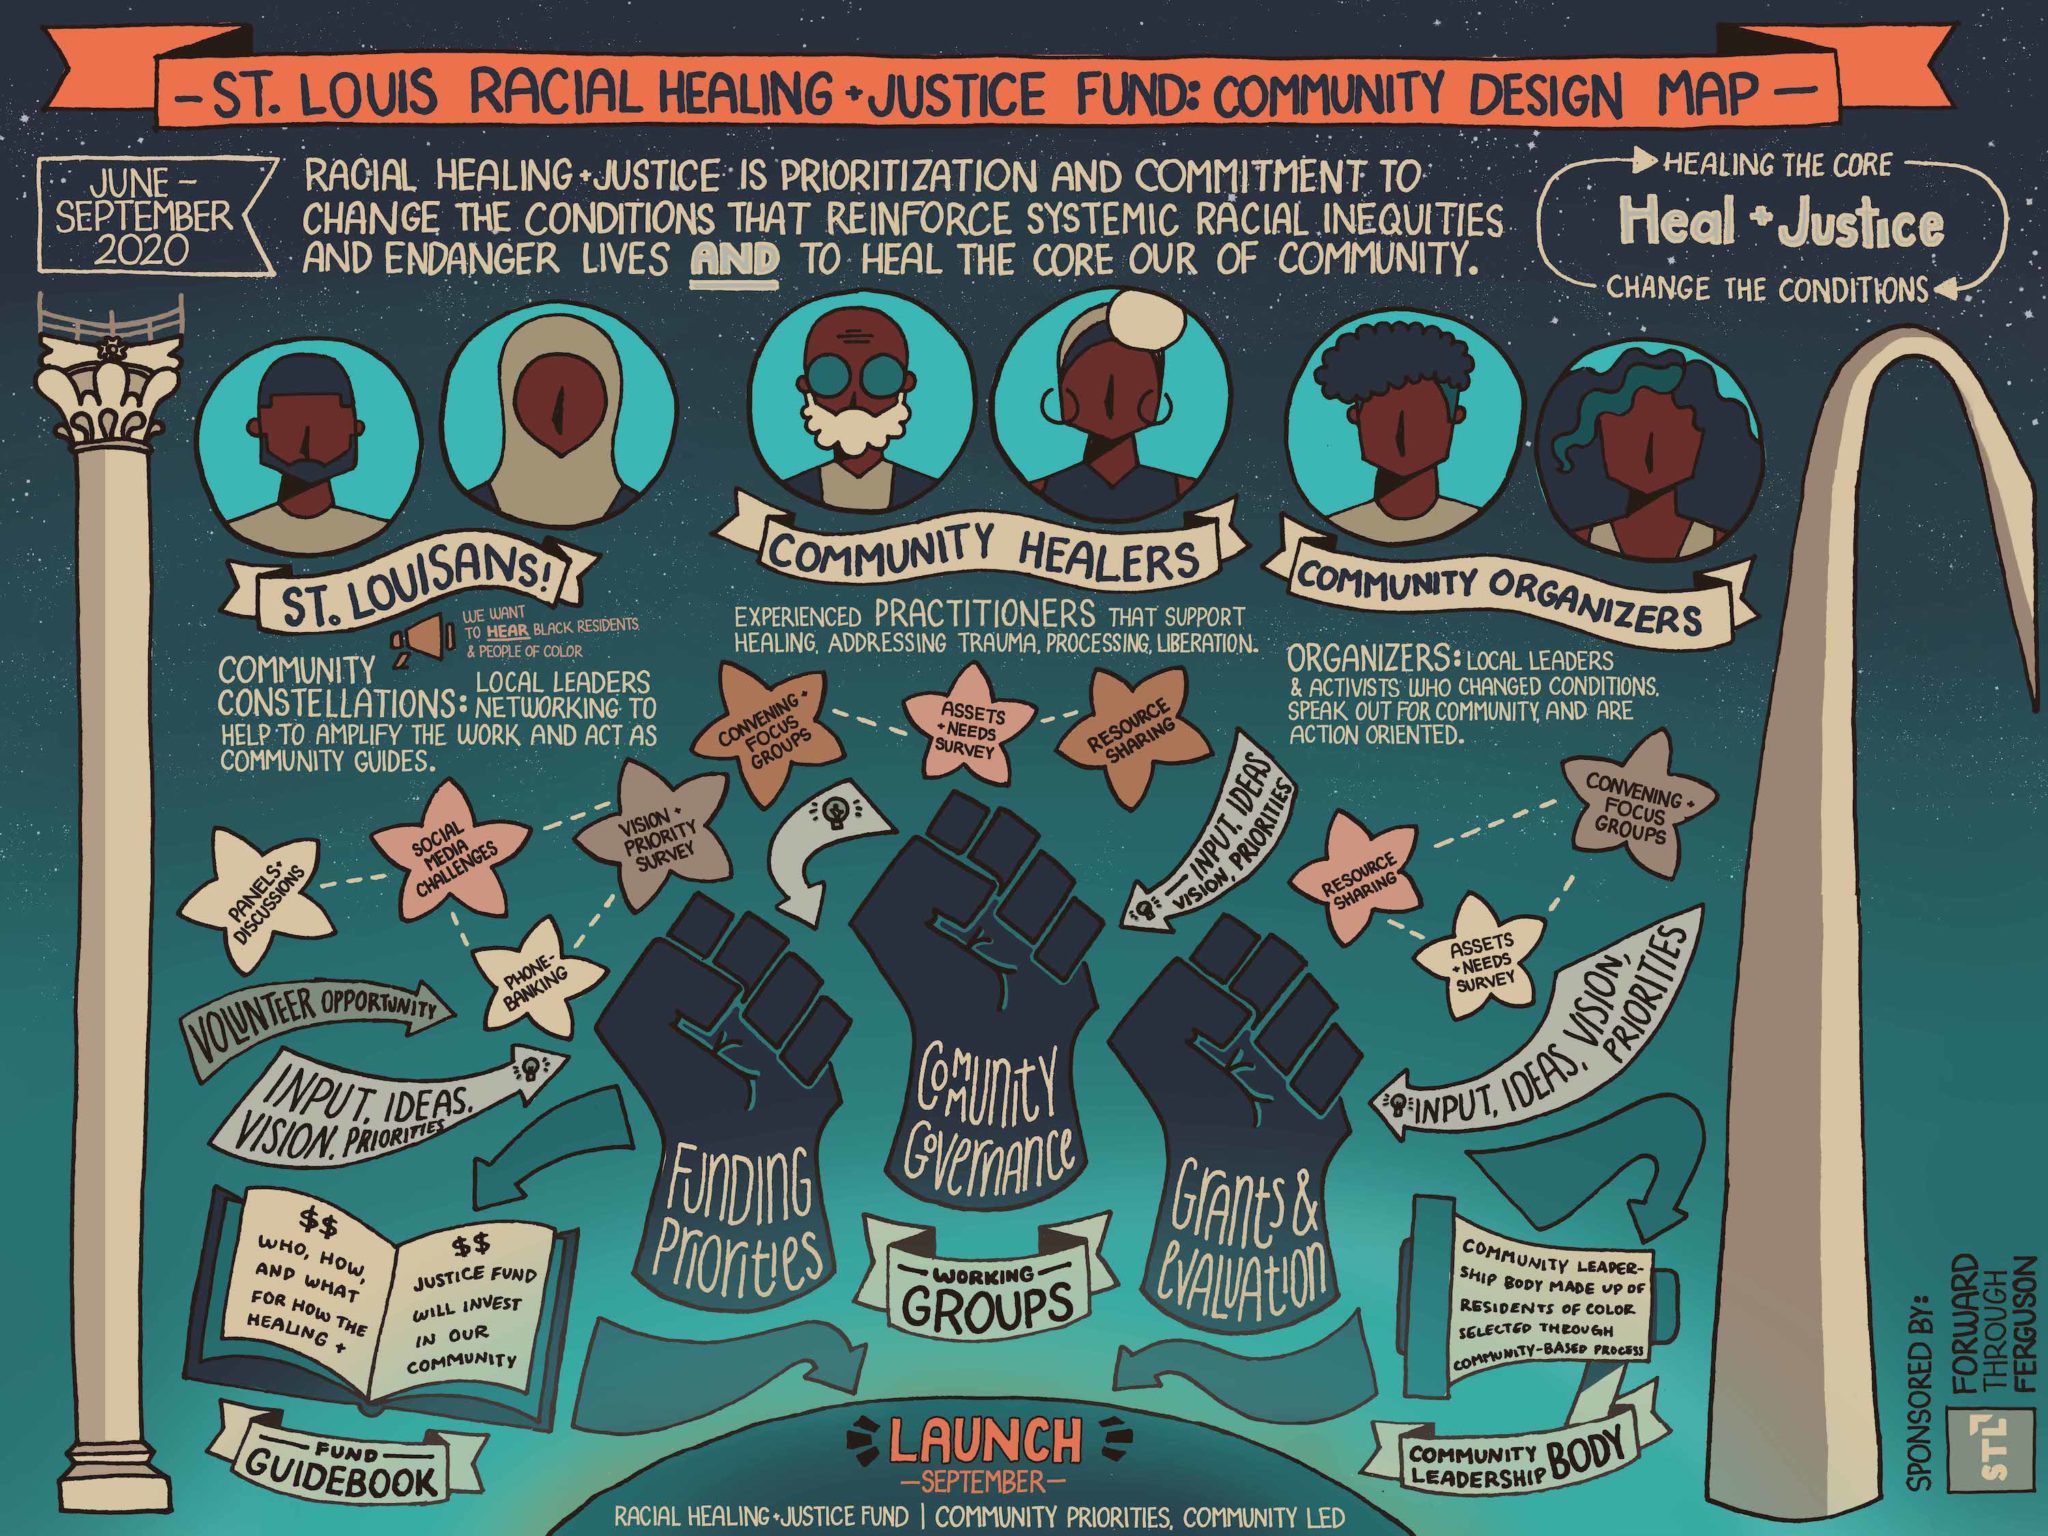 Map explaining the community design process for the racial healing fund